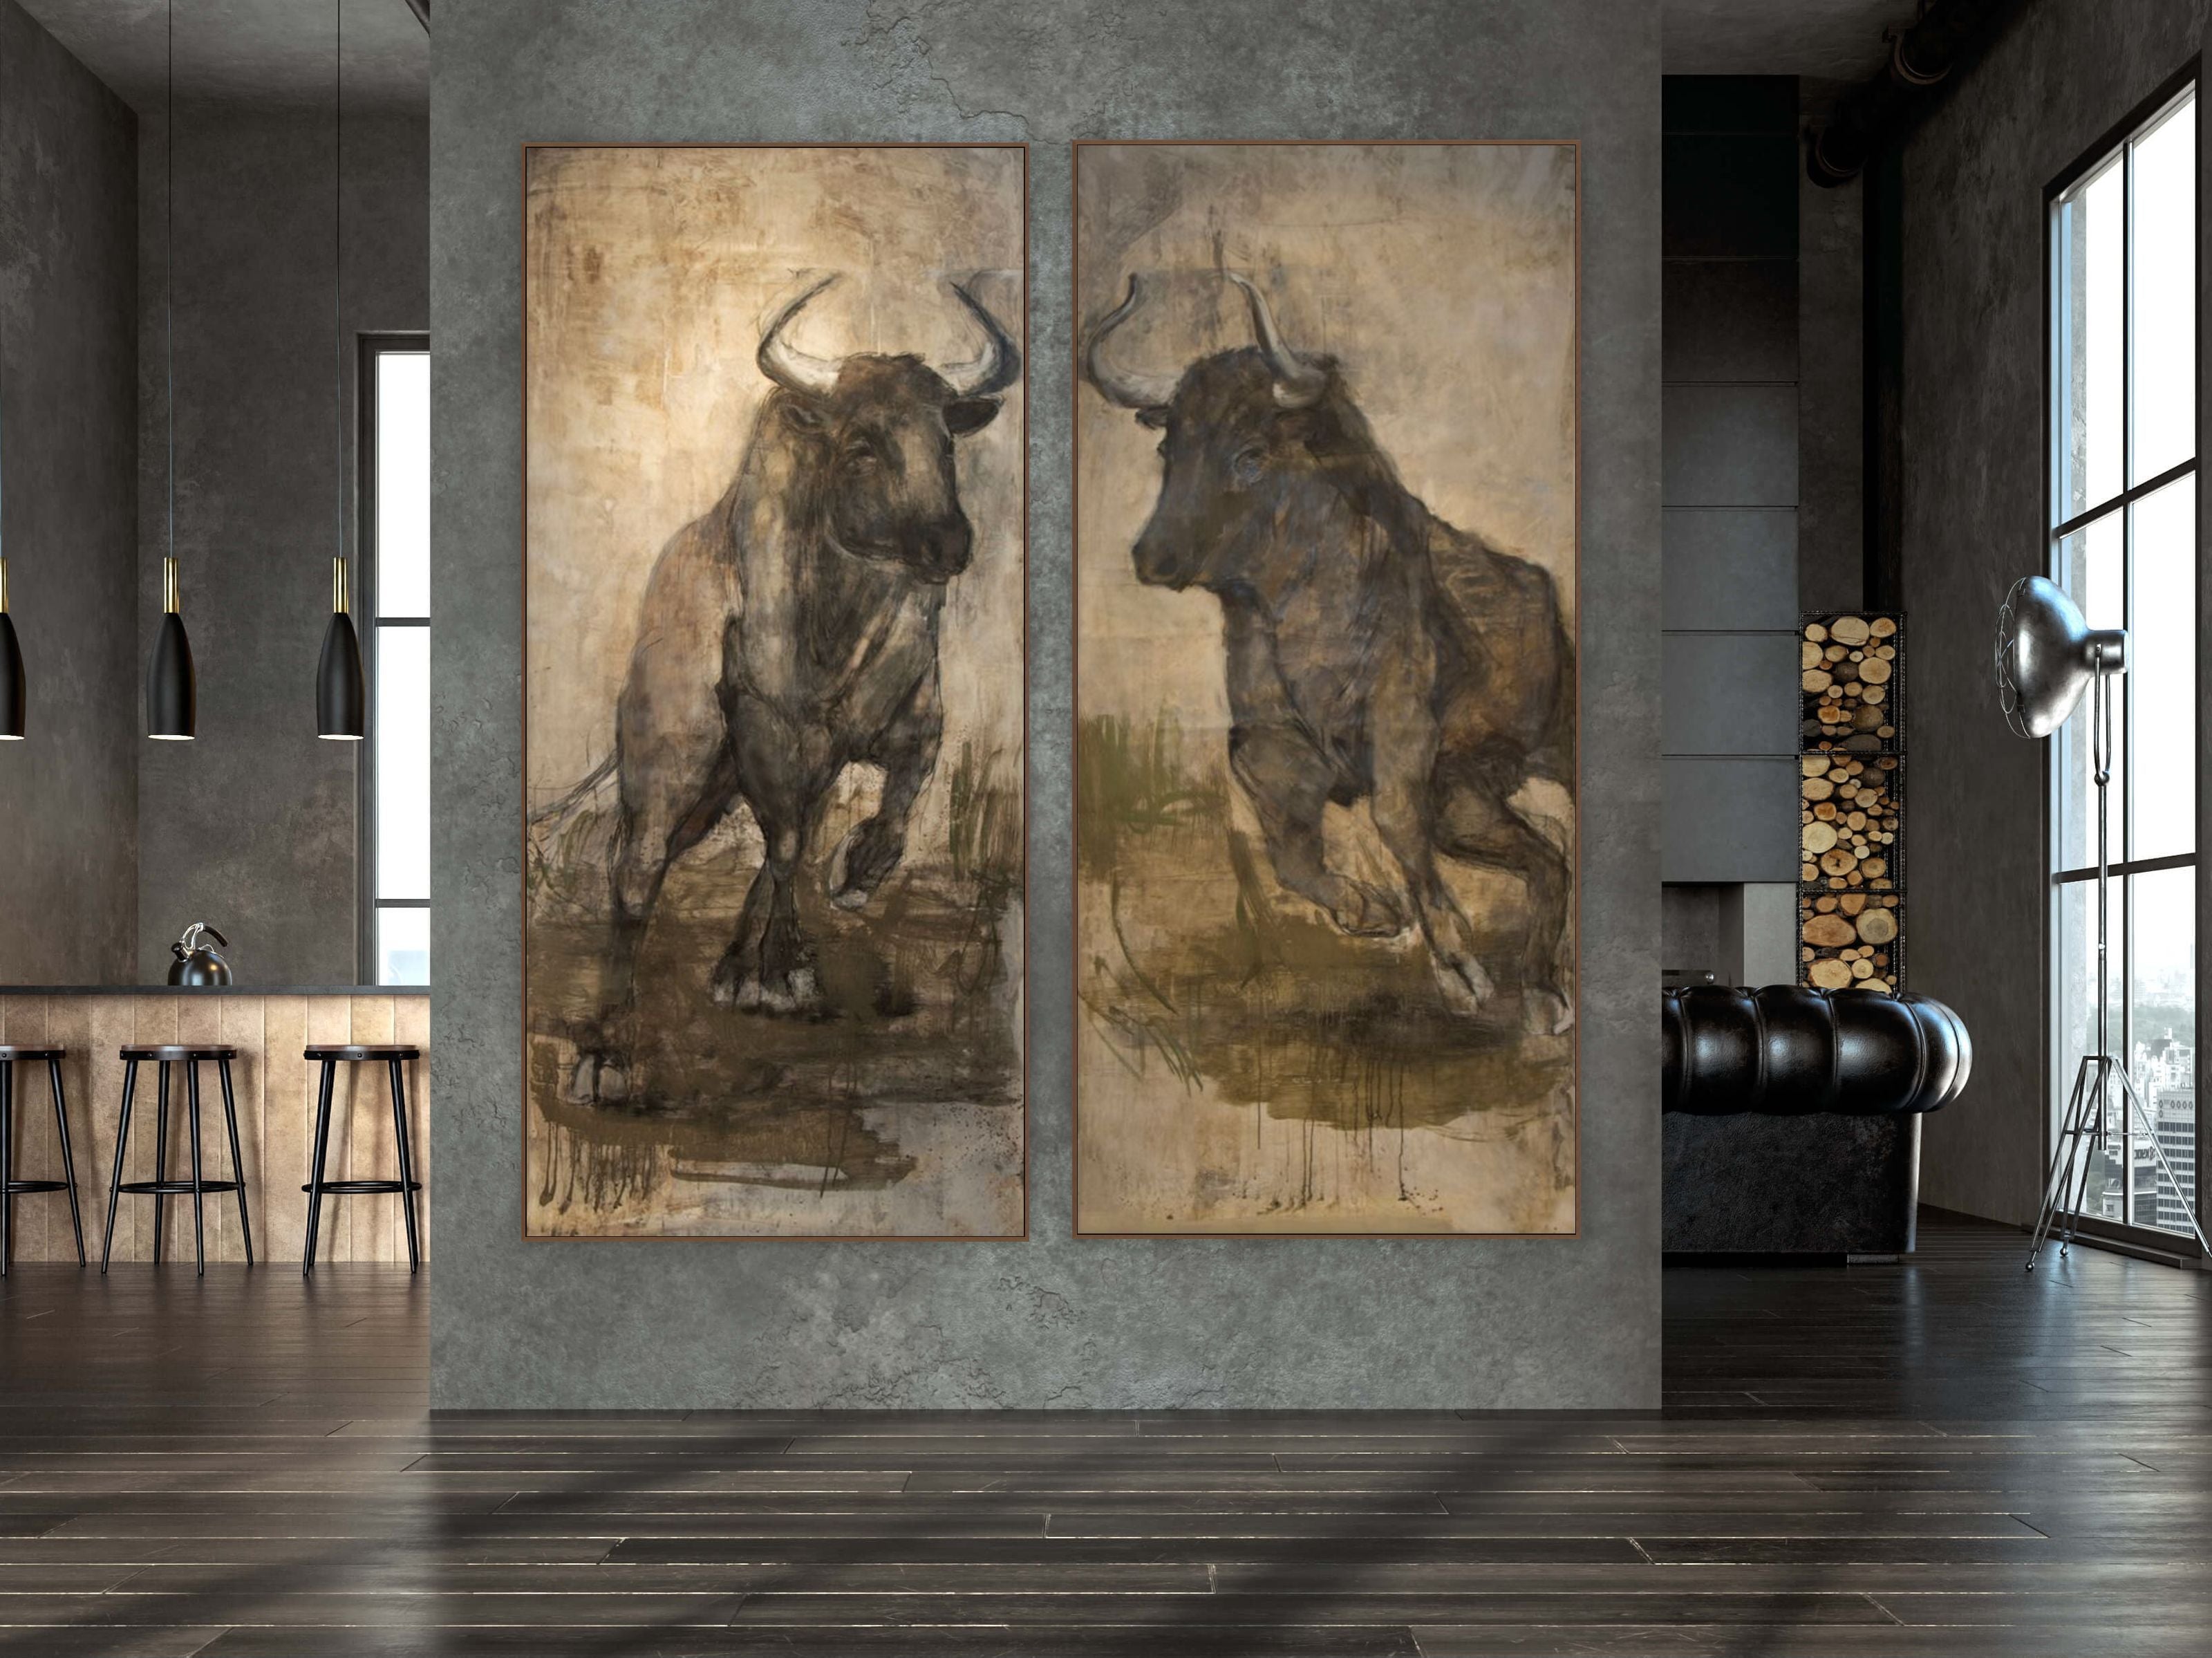 Created with dry pigments and charcoal on paper mounted on wood panel, Samson the bull's partner Delilah, in muted natural tones, sweet and full of life. A fantastic piece for a lofty wall and space, perhaps with her pal Samson by artist Isabelle Truchon.